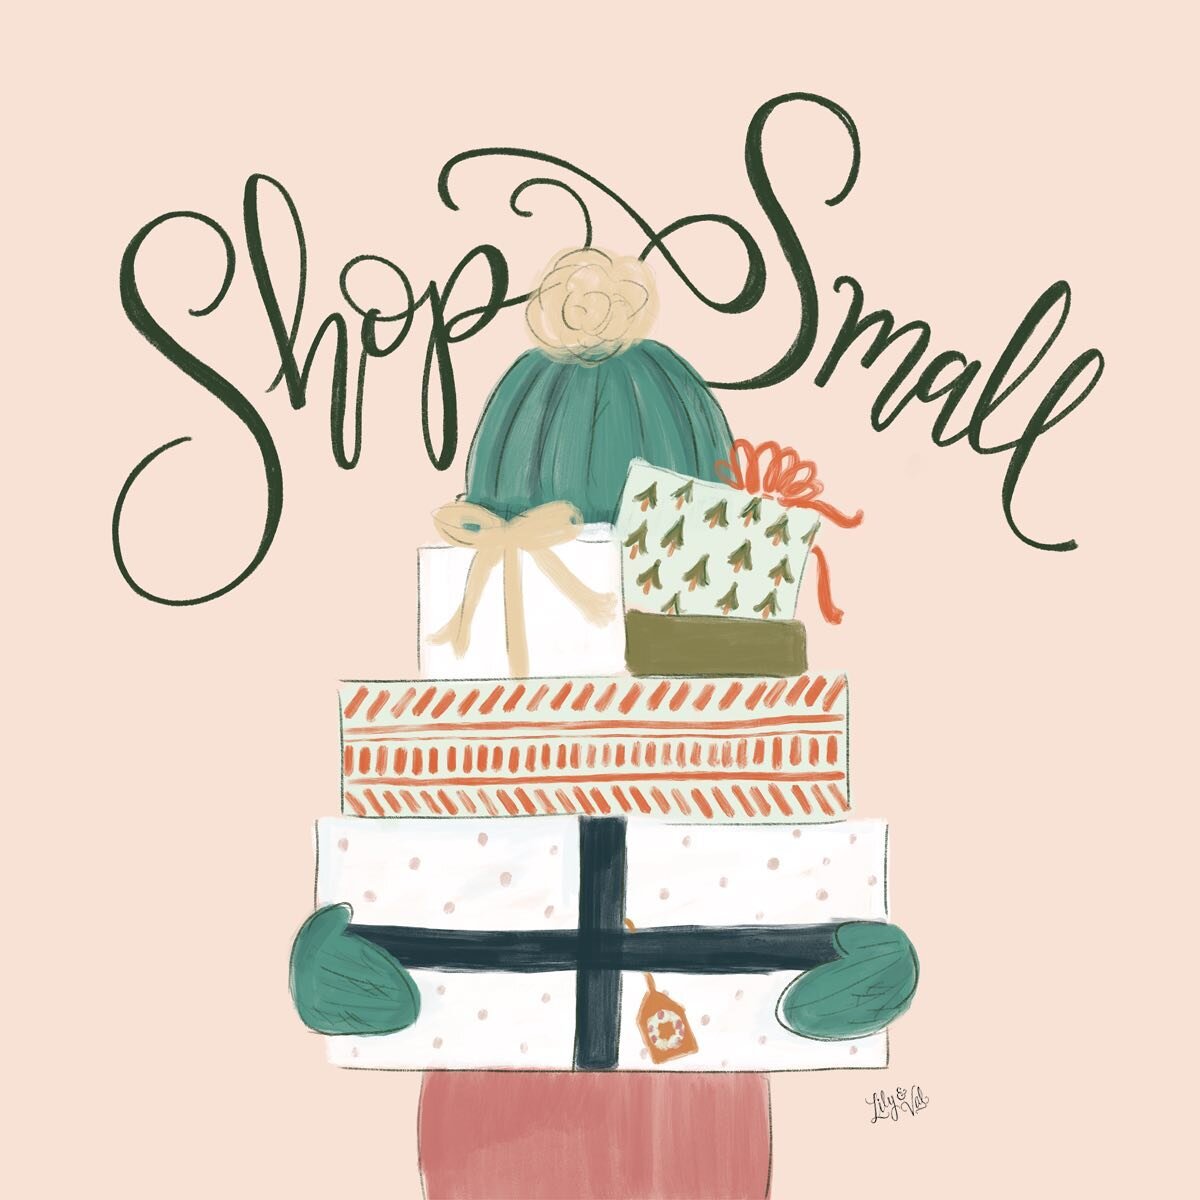 Remember to please shop small this holiday season! Please visit our website www.Timothy pamment salon.com or email michelle@Timothypammentsalon.com, OR stop by the salon!! We have gift ideas for women, men, teenagers, kids, newlyweds, grandparents an